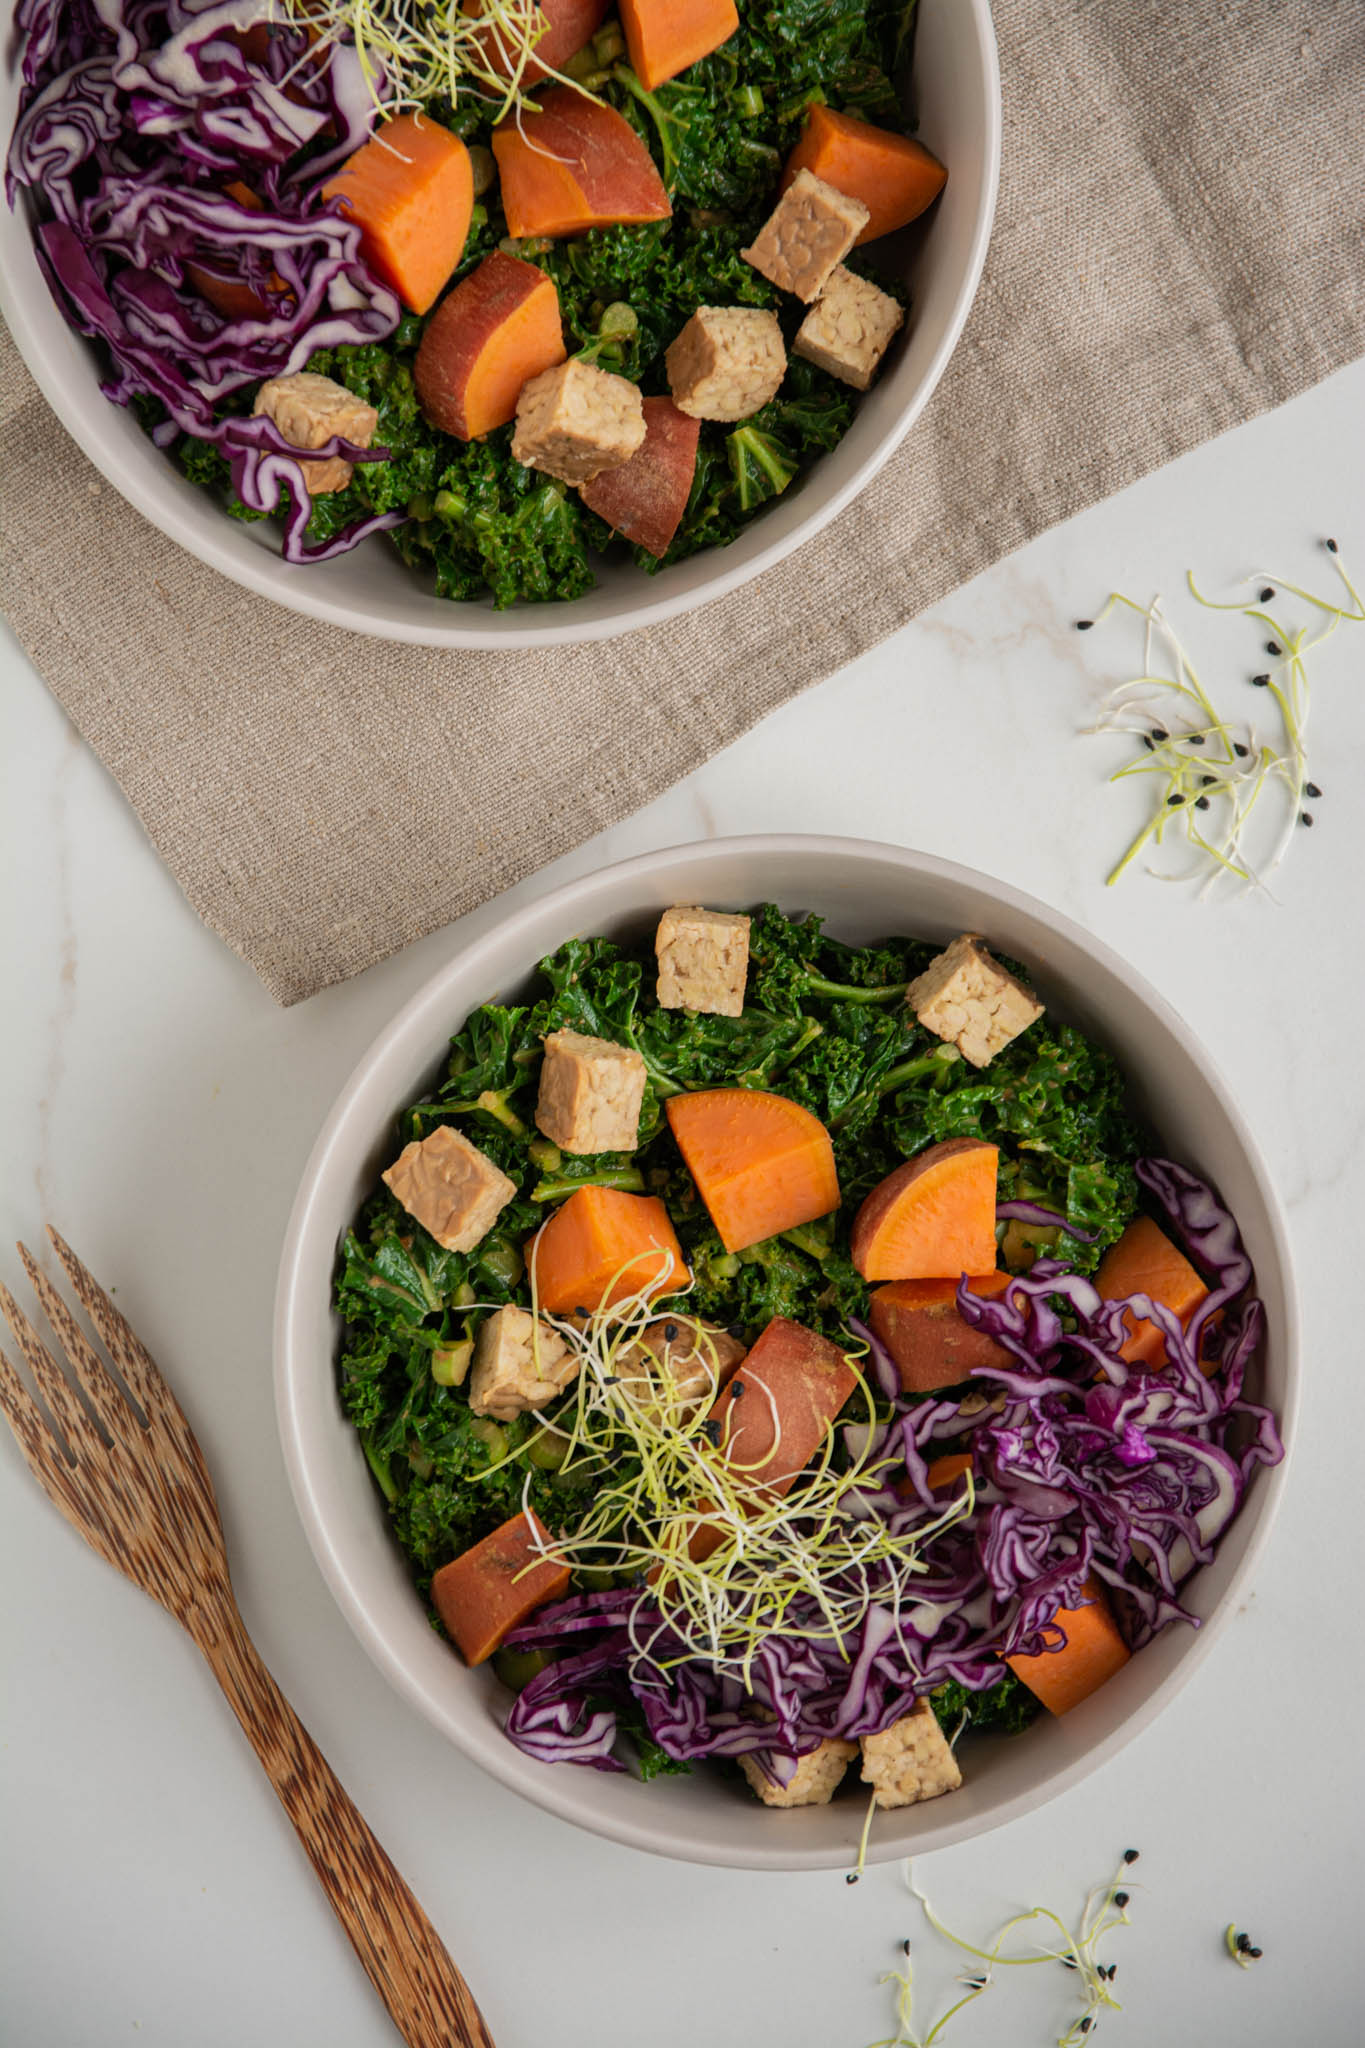 Any fan of kale will enjoy this healthy and delicious massaged kale salad that is ready in under 30 minutes. Steamed and massaged kale paired with sweet potatoes and tempeh makes a filling and nourishing plant-based meal. Using steamed kale for greater antioxidant capacity. 